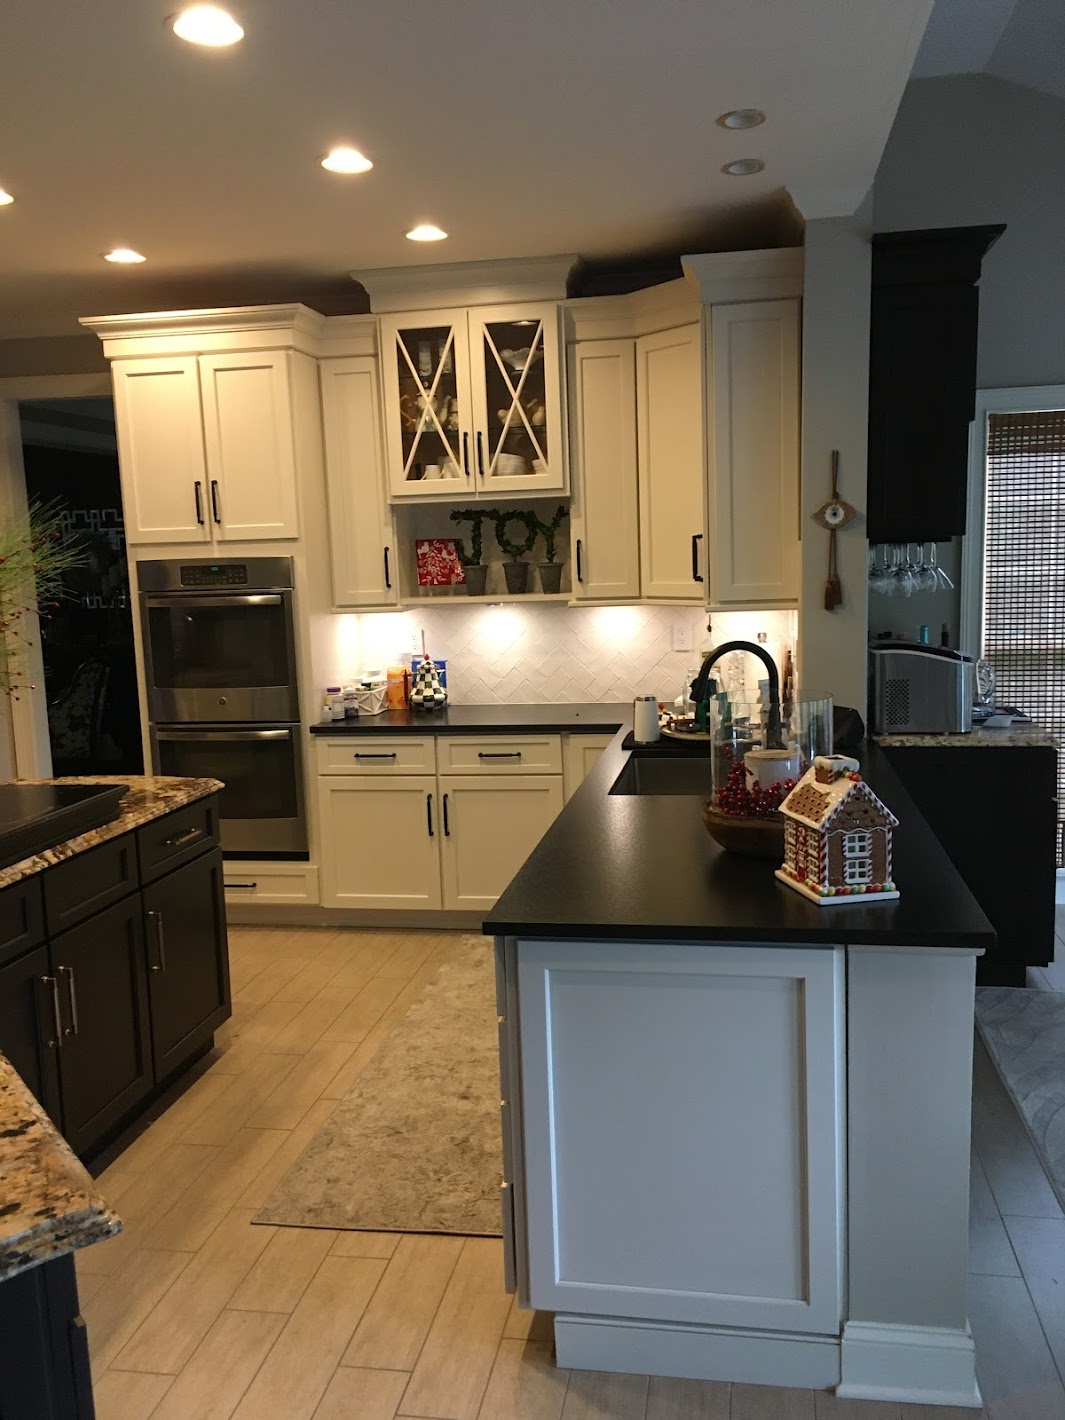 Main cabinets were finished in a white paint with glass door accents in this custom kitchen cabinet refacing transformation.